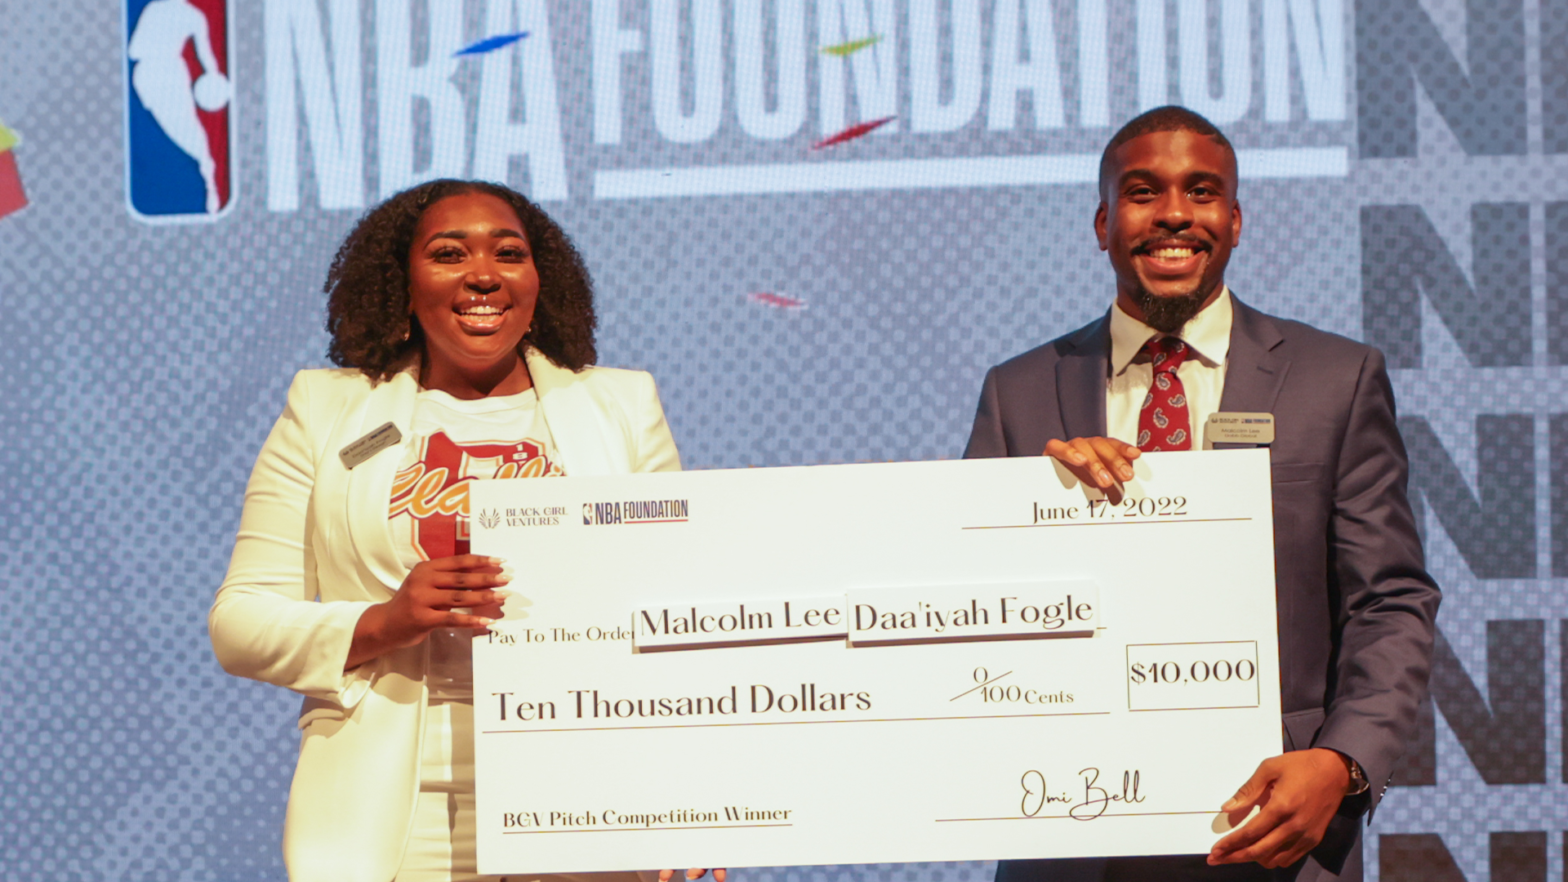 HBCU Entrepreneurs Daa’iyah Fogle,Malcolm Lee Earn $10K Prize At NBA Foundation's First-Ever Pitch Competition With Black Girl Ventures